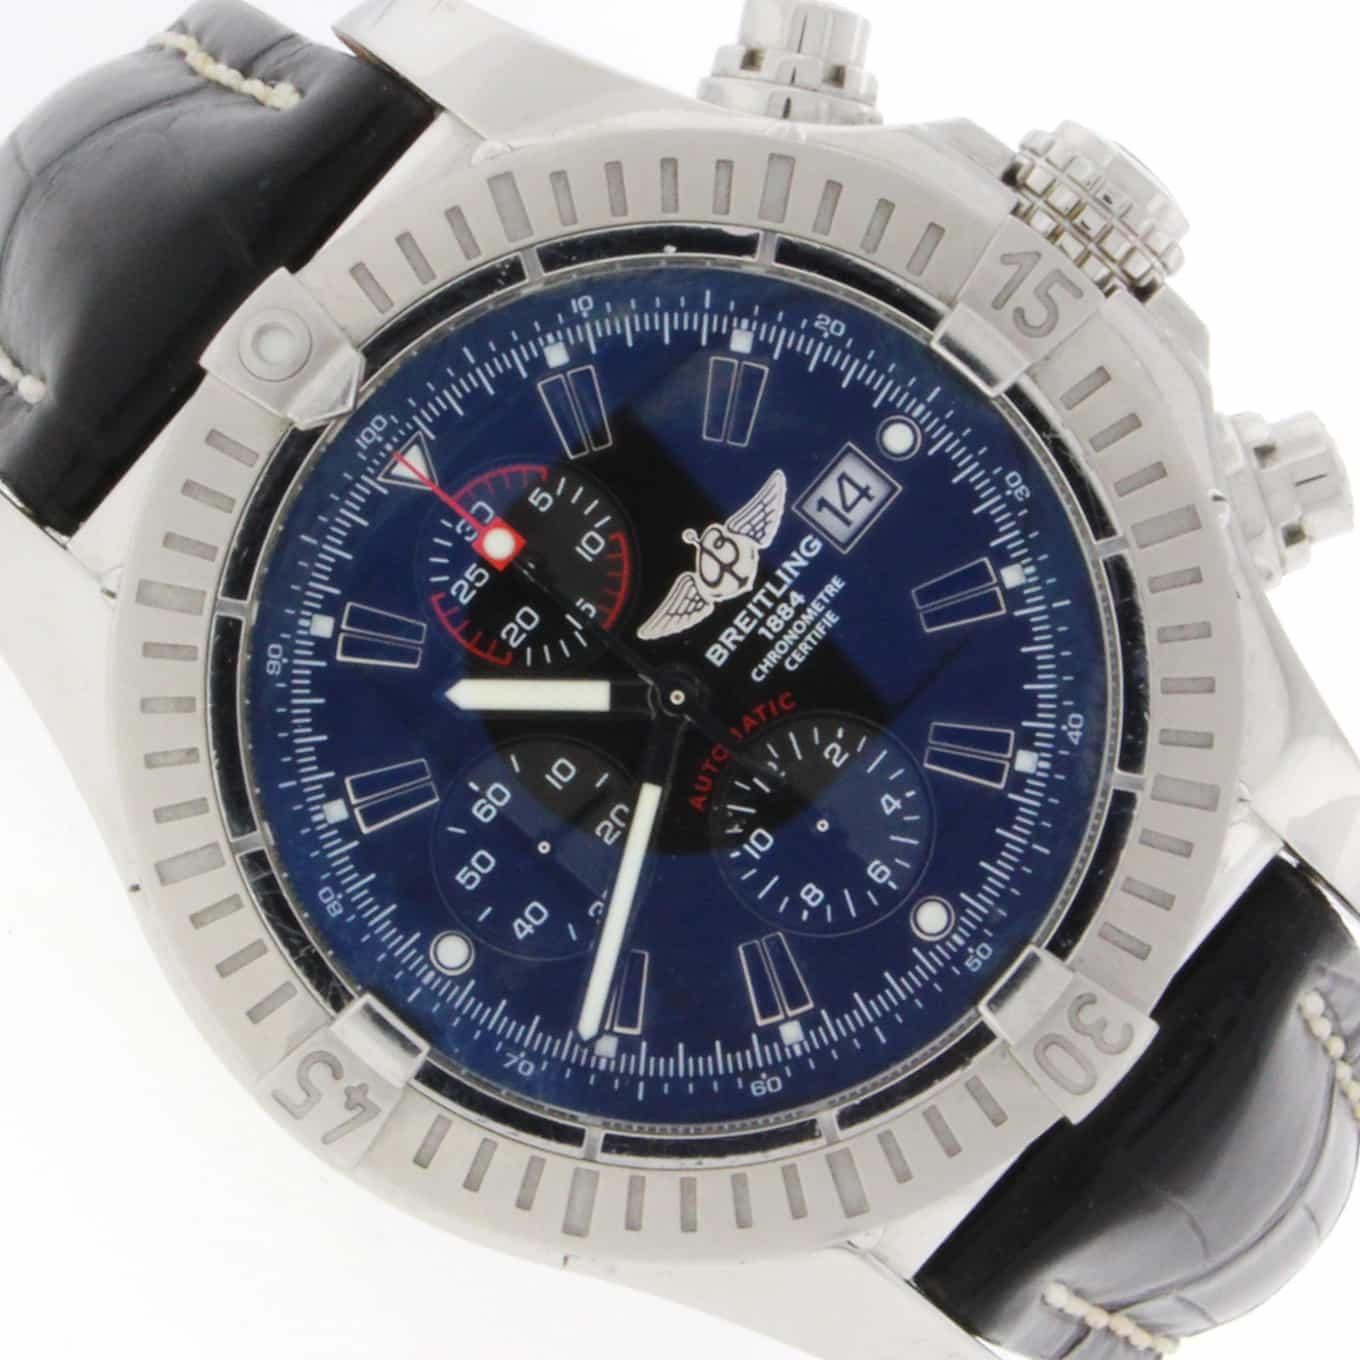 Breitling Super Avenger 49MM Chronograph Automatic Stainless Steel Mens Watch A13370

Breitling Super Avenger Chronograph Automatic Stainless Steel Mens Watch, A13370. Self-winding automatic officially certified Breitling 13 movement. Stainless